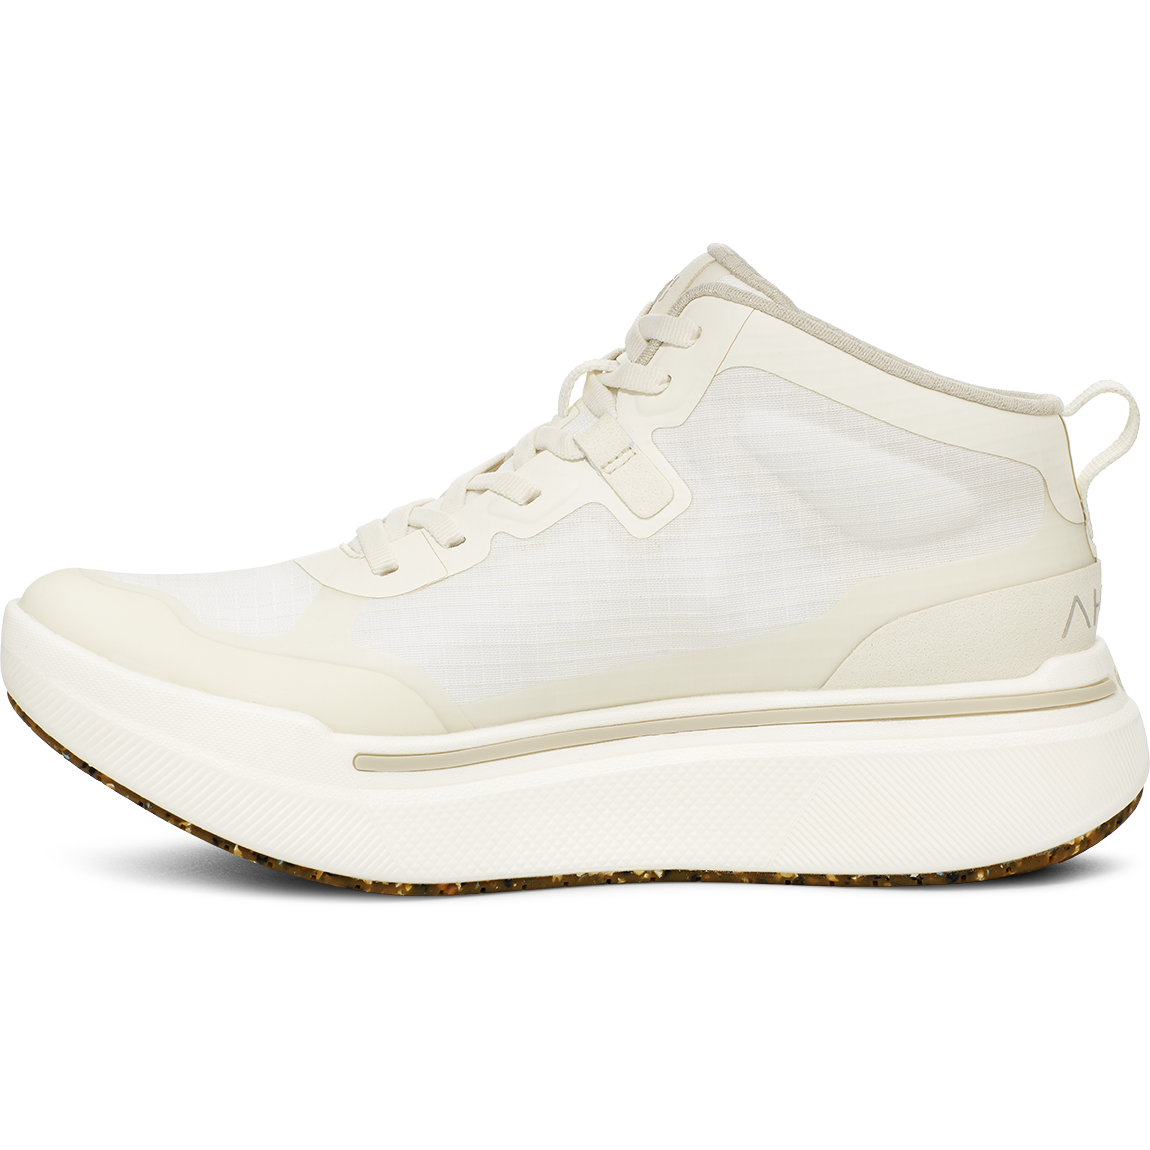 AHNU M Sneakers M Sequence Mid, White